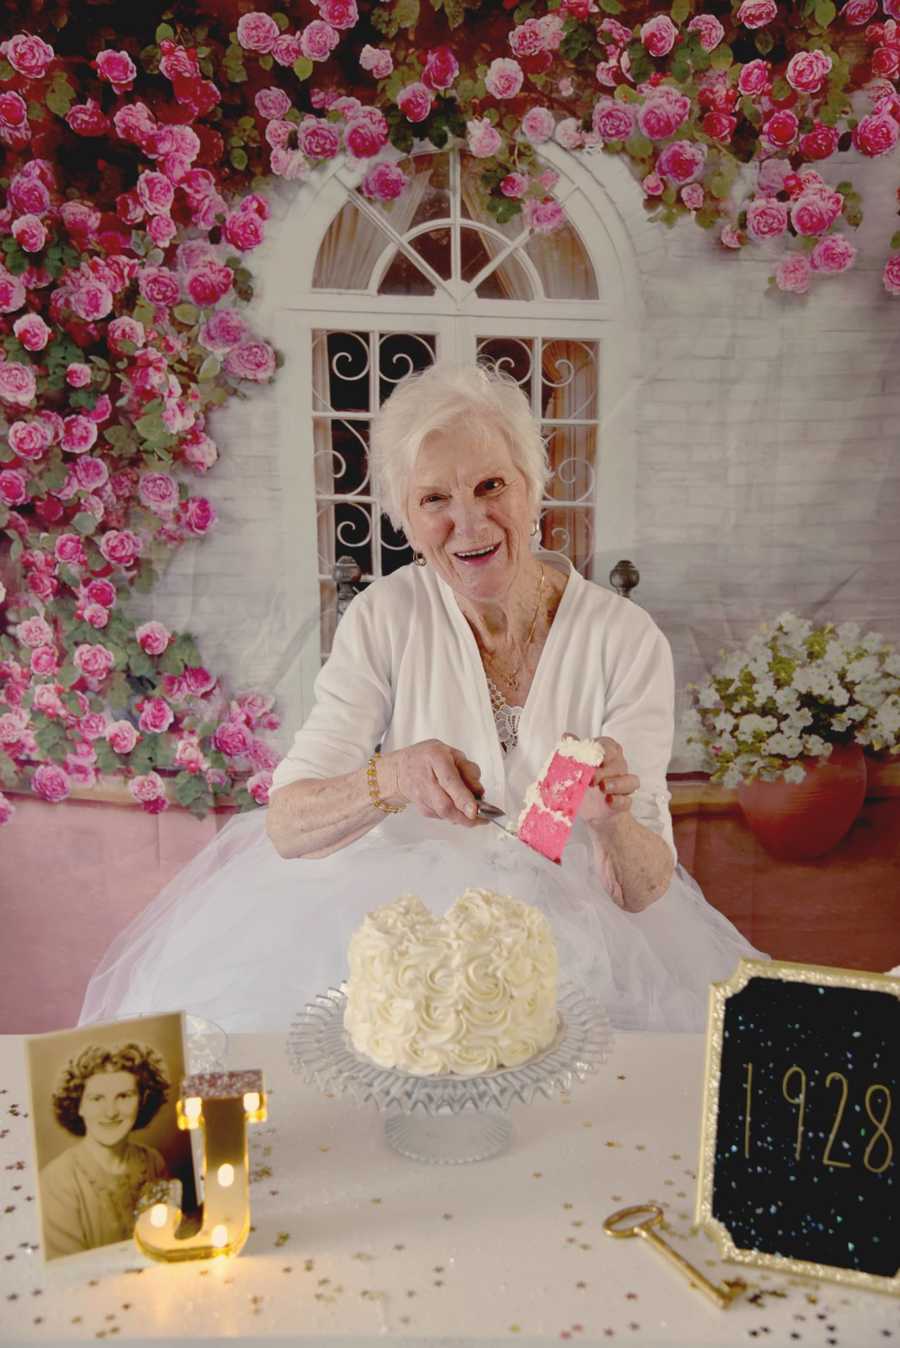 90 year old woman smiles while holding a piece of pink cake with white frosting in the air